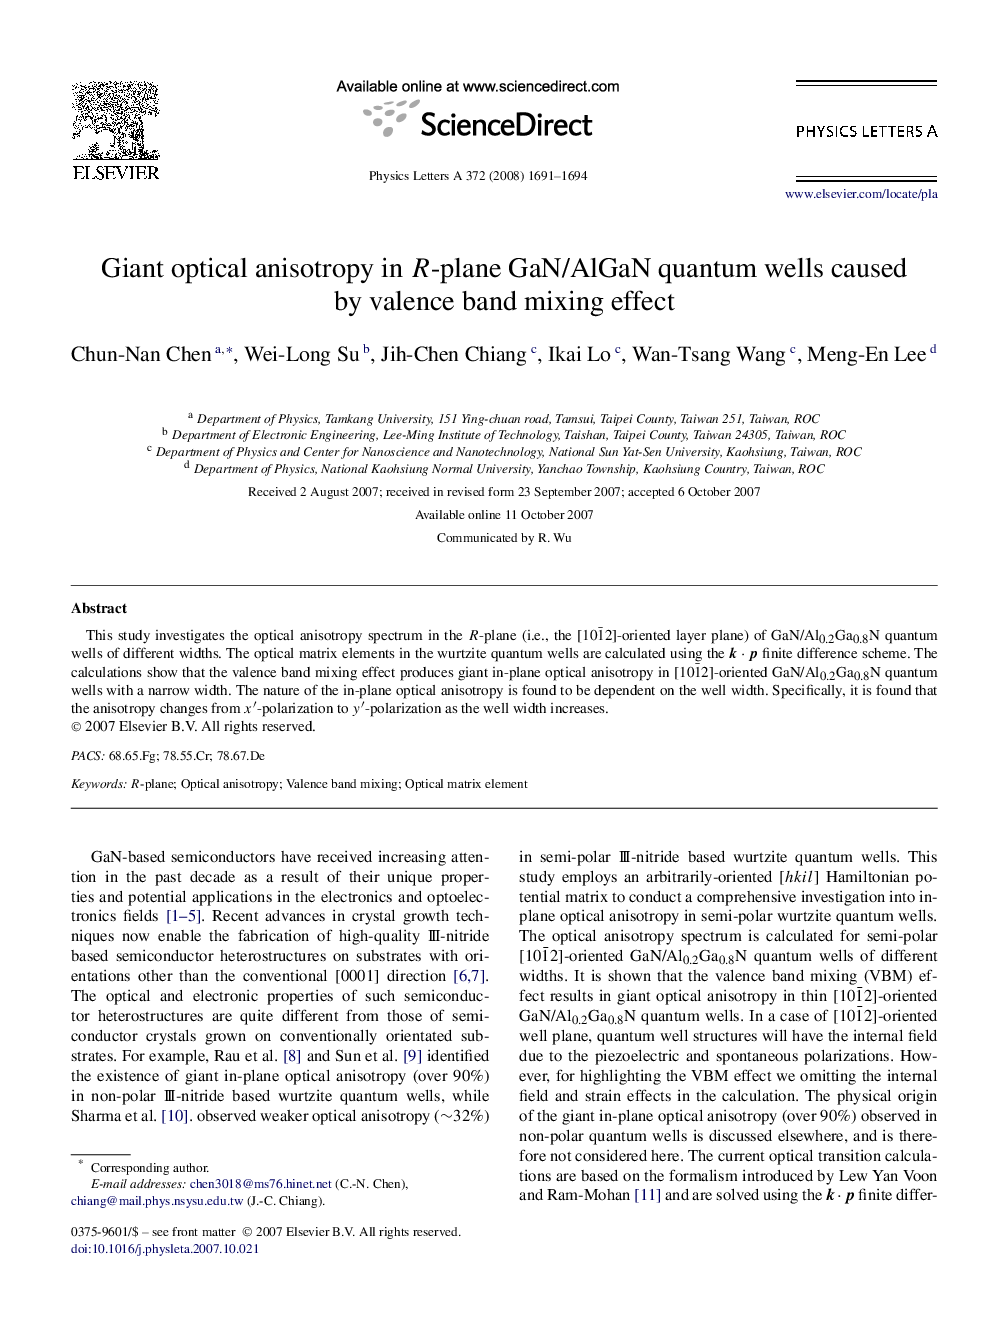 Giant optical anisotropy in R-plane GaN/AlGaN quantum wells caused by valence band mixing effect